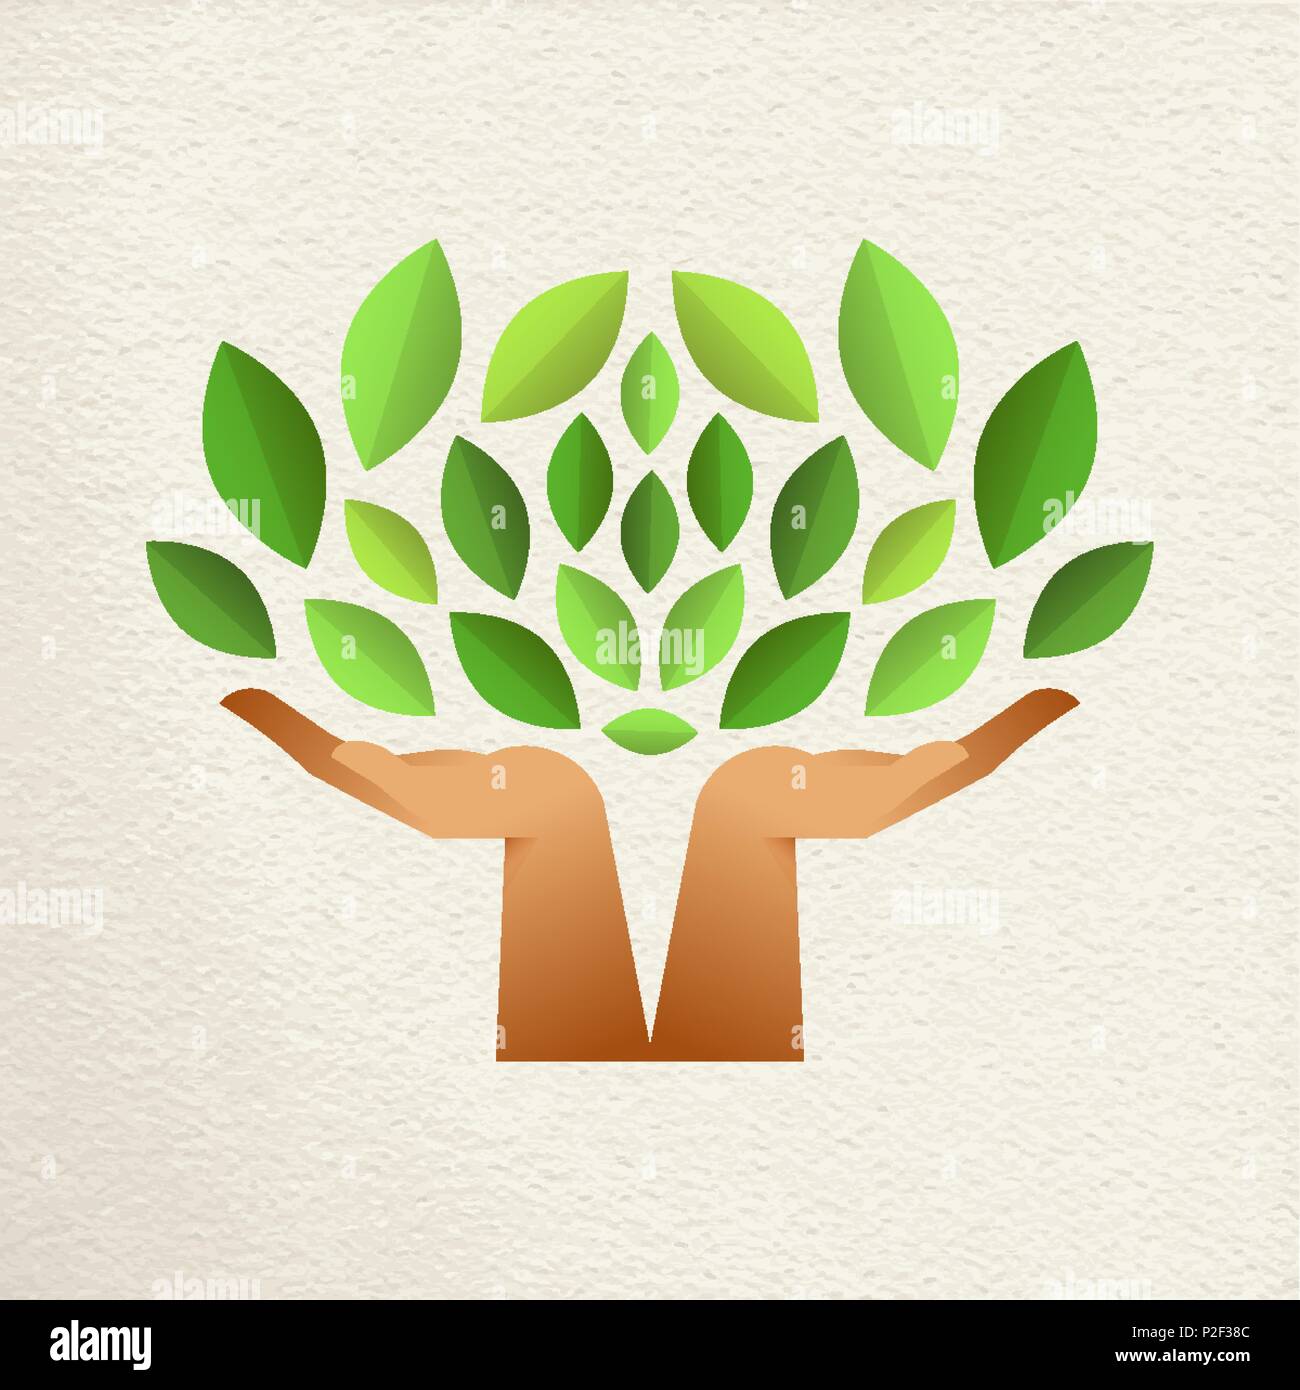 Tree with human hands together and green leaves. Eco friendly concept illustration for environment help, nature care or charity project. EPS10 vector. Stock Vector